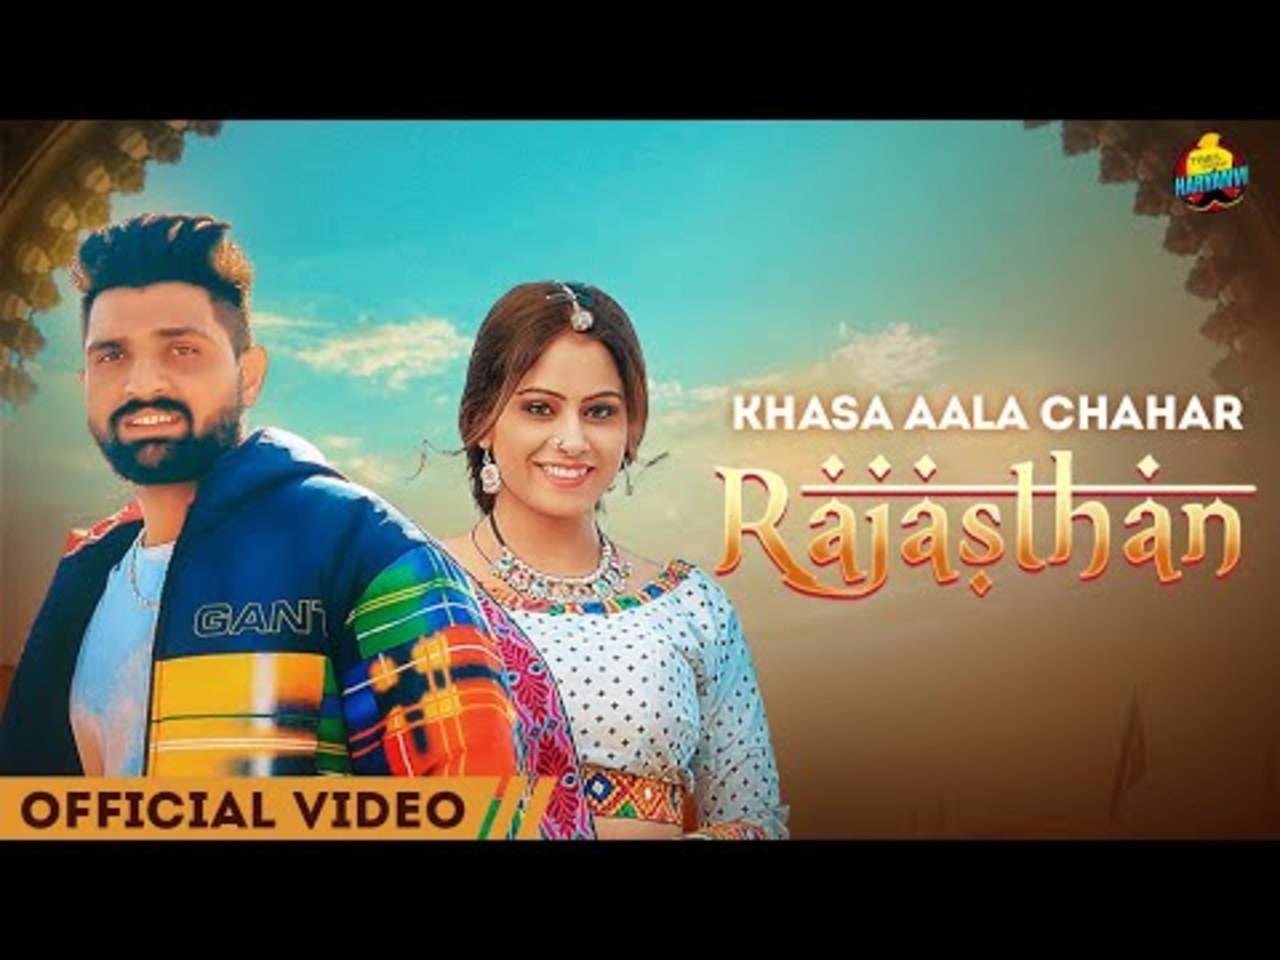 david rabitor recommends rajasthani song video download pic